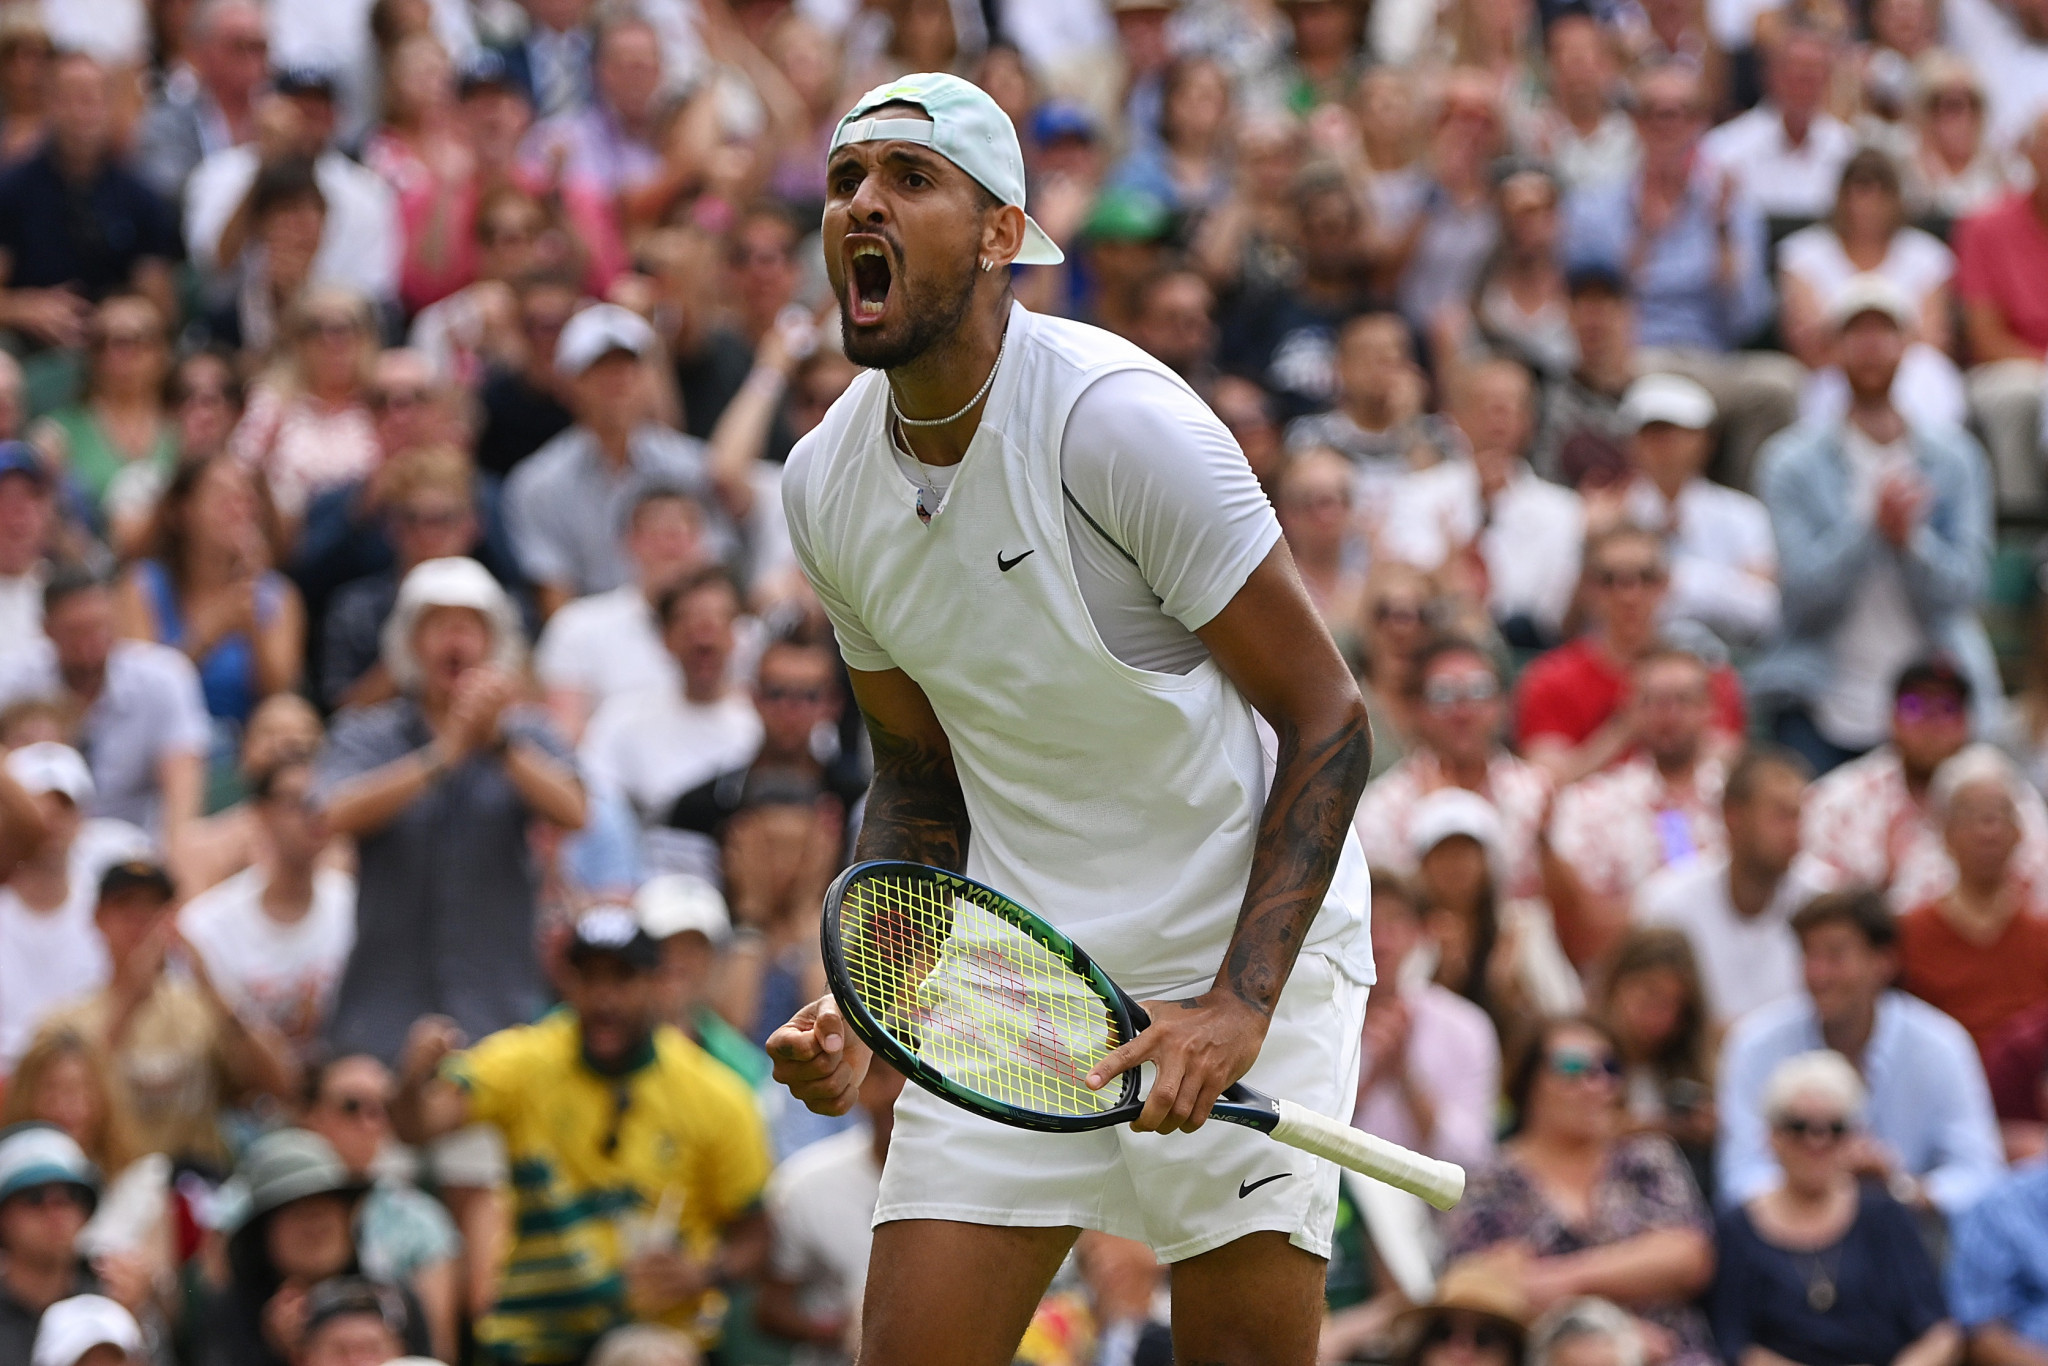 Nick Kyrgios reached the Wimbledon final this year but continues his leave from the Davis Cup ©Getty Images